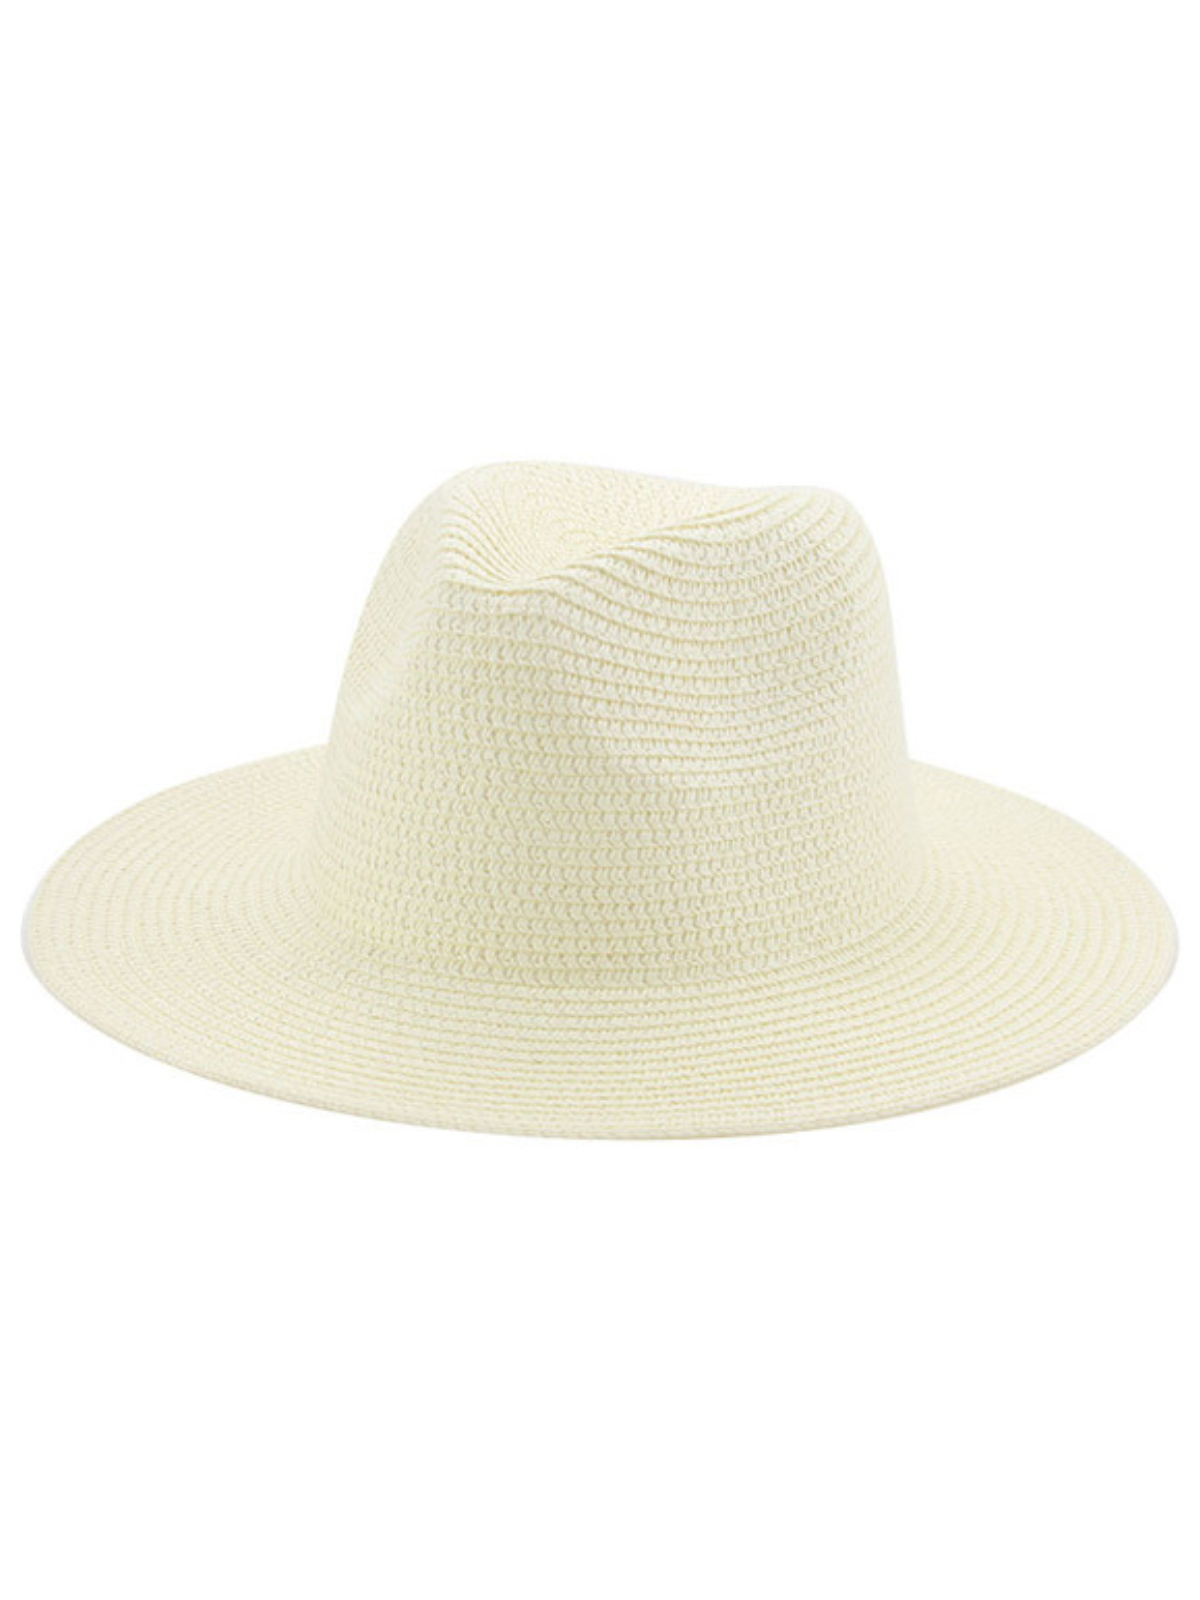 Not Your Basic Off White Sun Hat